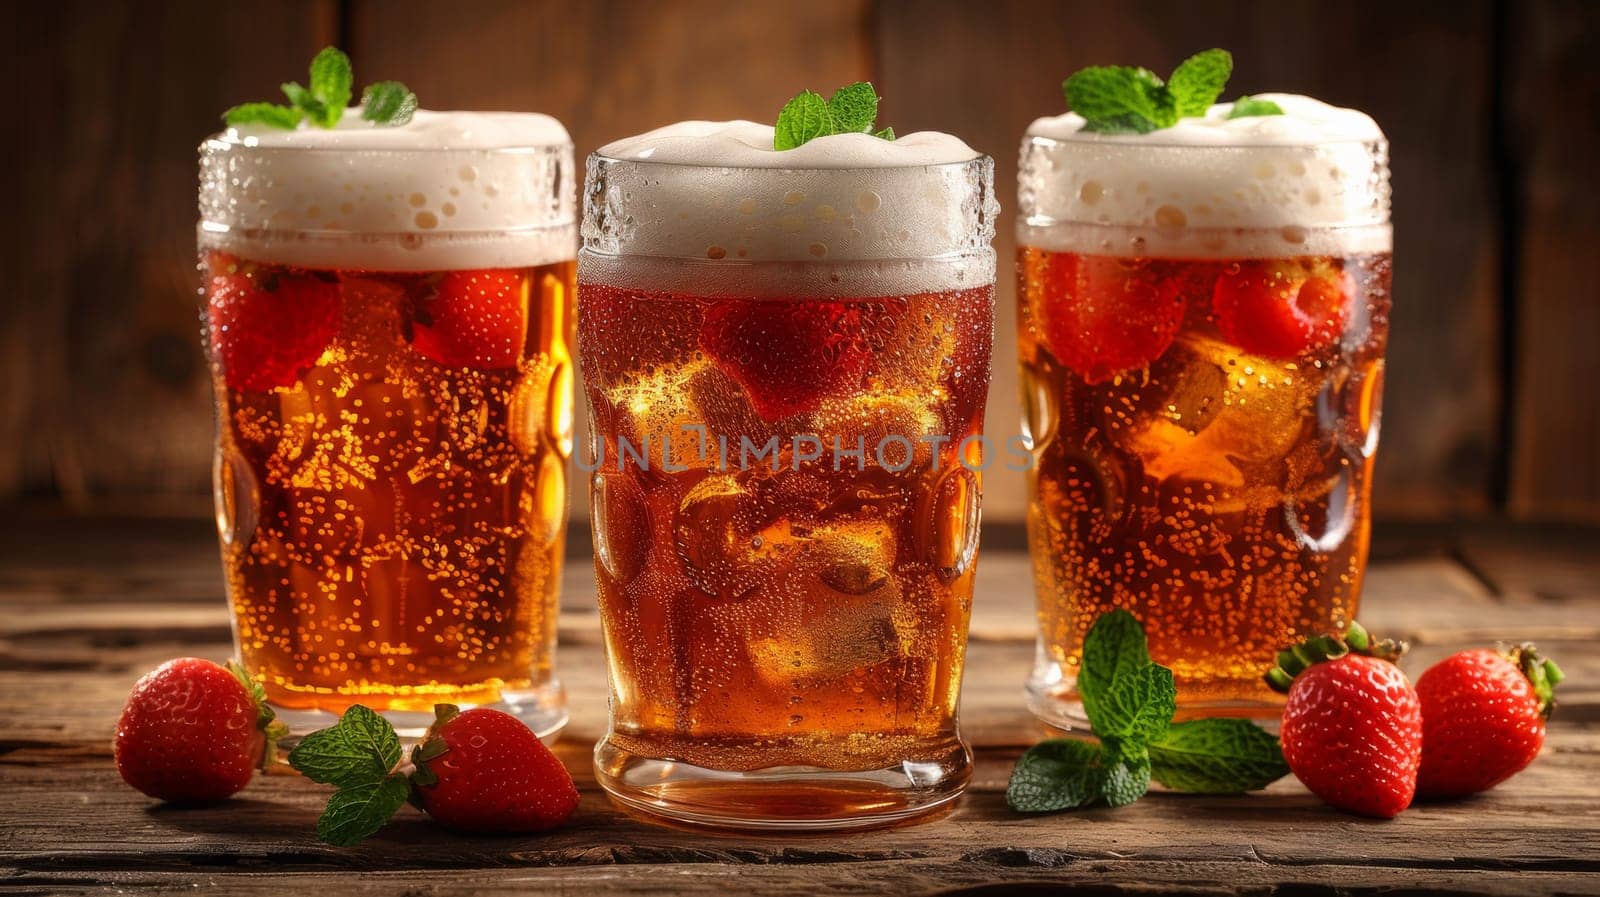 Three glasses of beer with ice and strawberries on a table